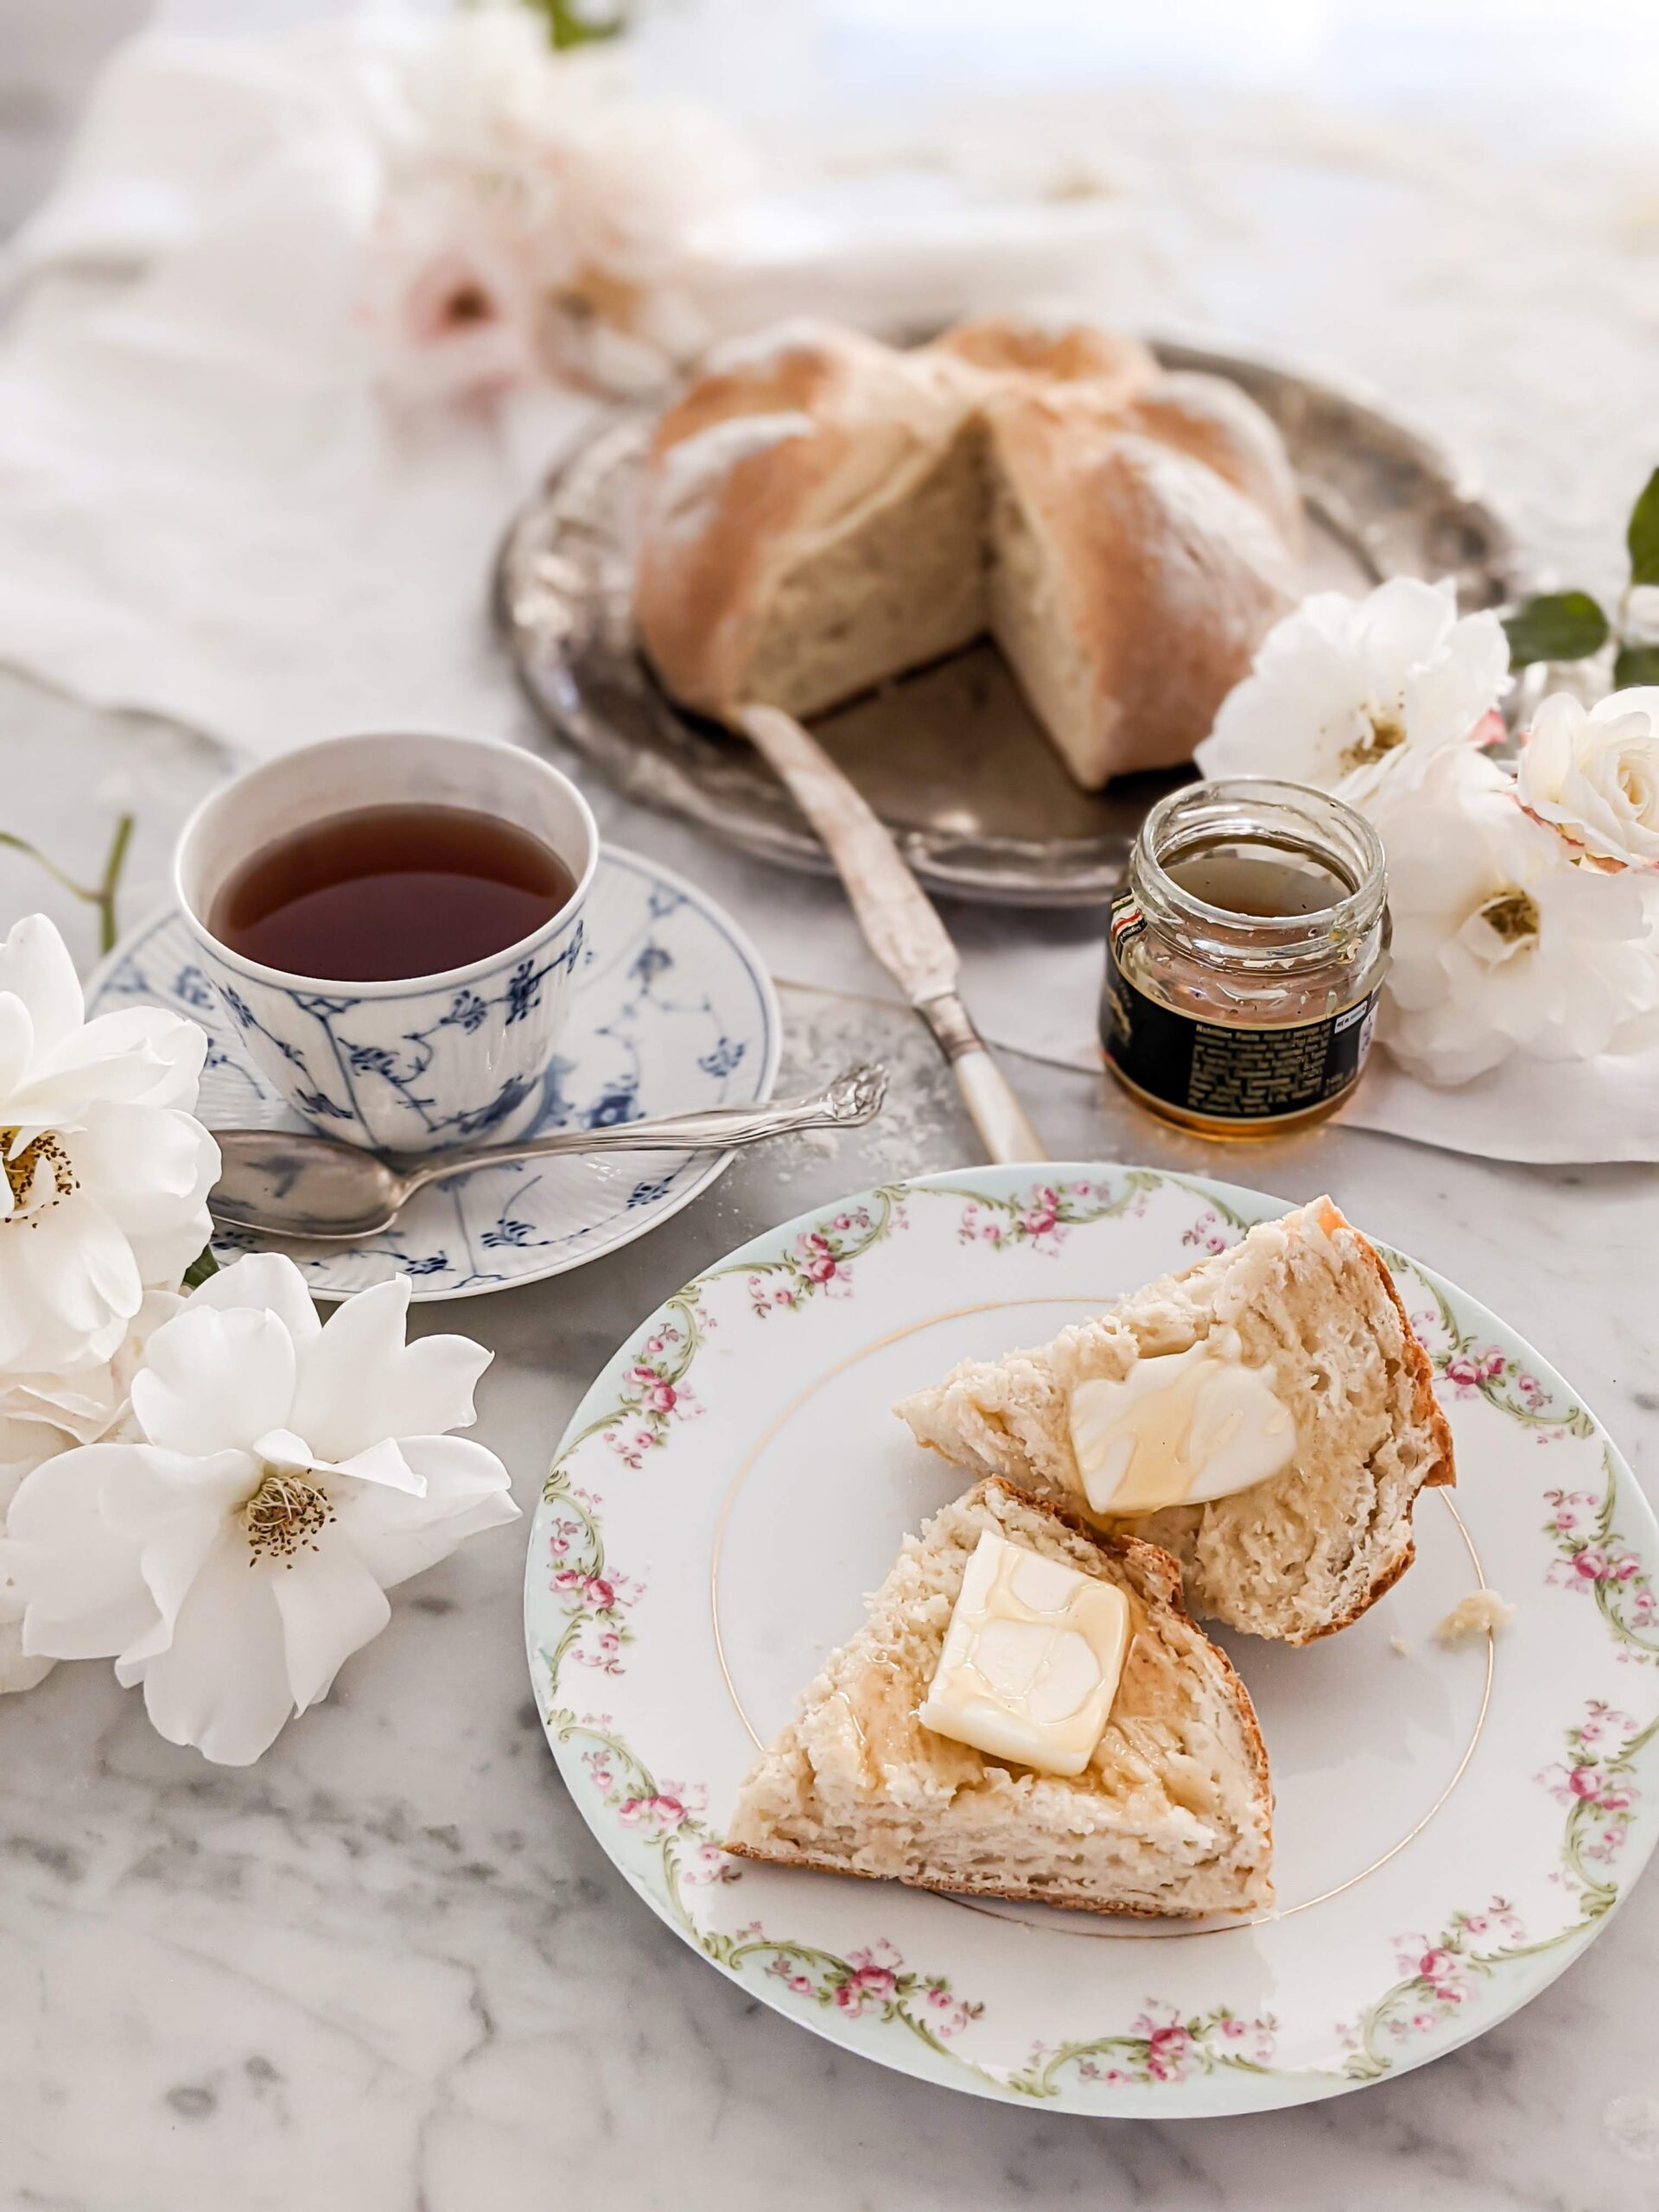 In the foreground is a floral plate with fresh bread and a teacup full of tea. Blurred in the background is the rest of the loaf of bread.